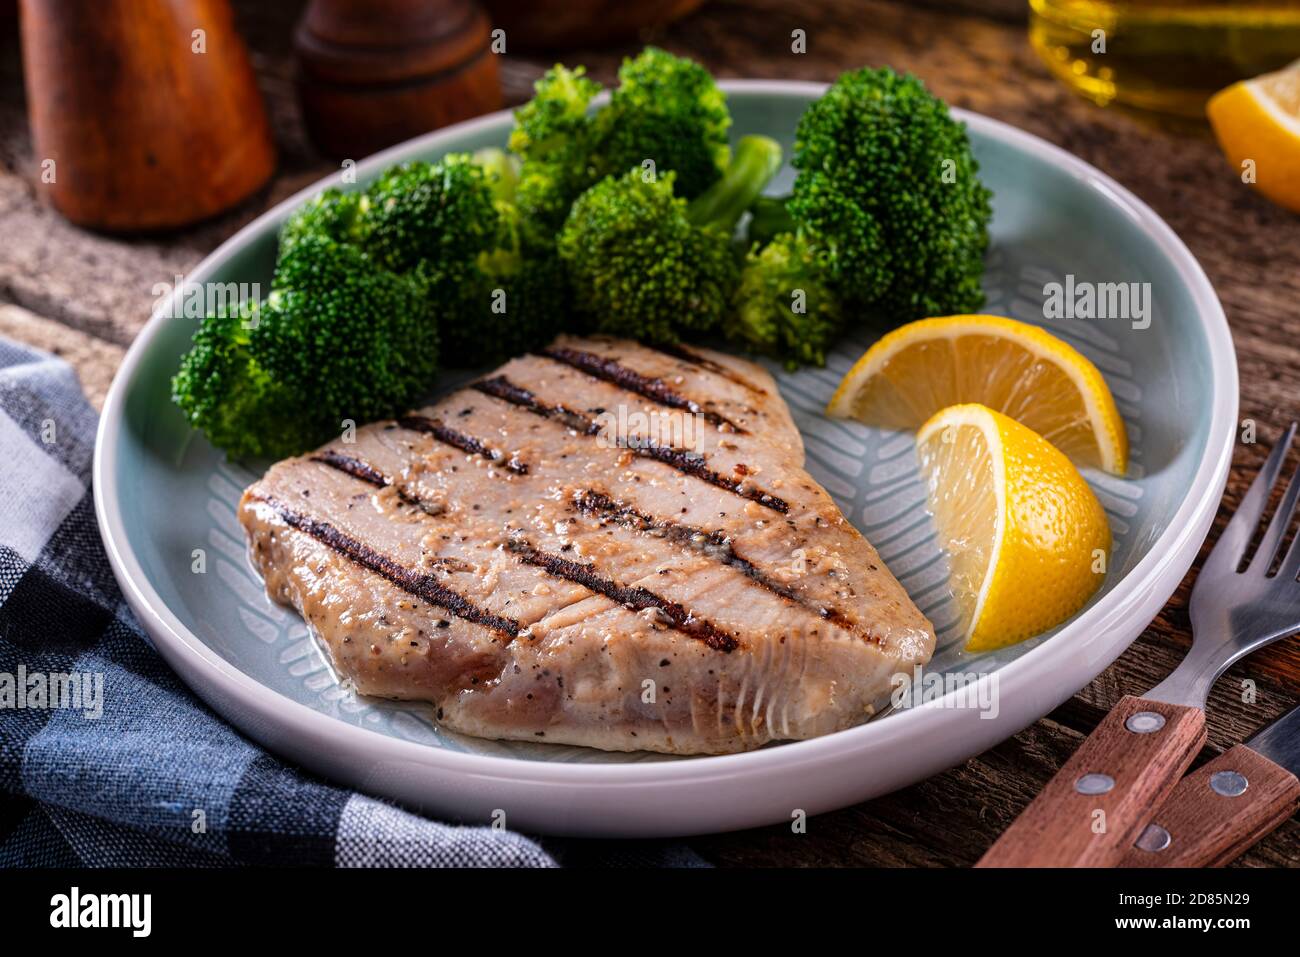 A delicious grilled lemon and pepper marinated tuna steak with steamed broccoli. Stock Photo